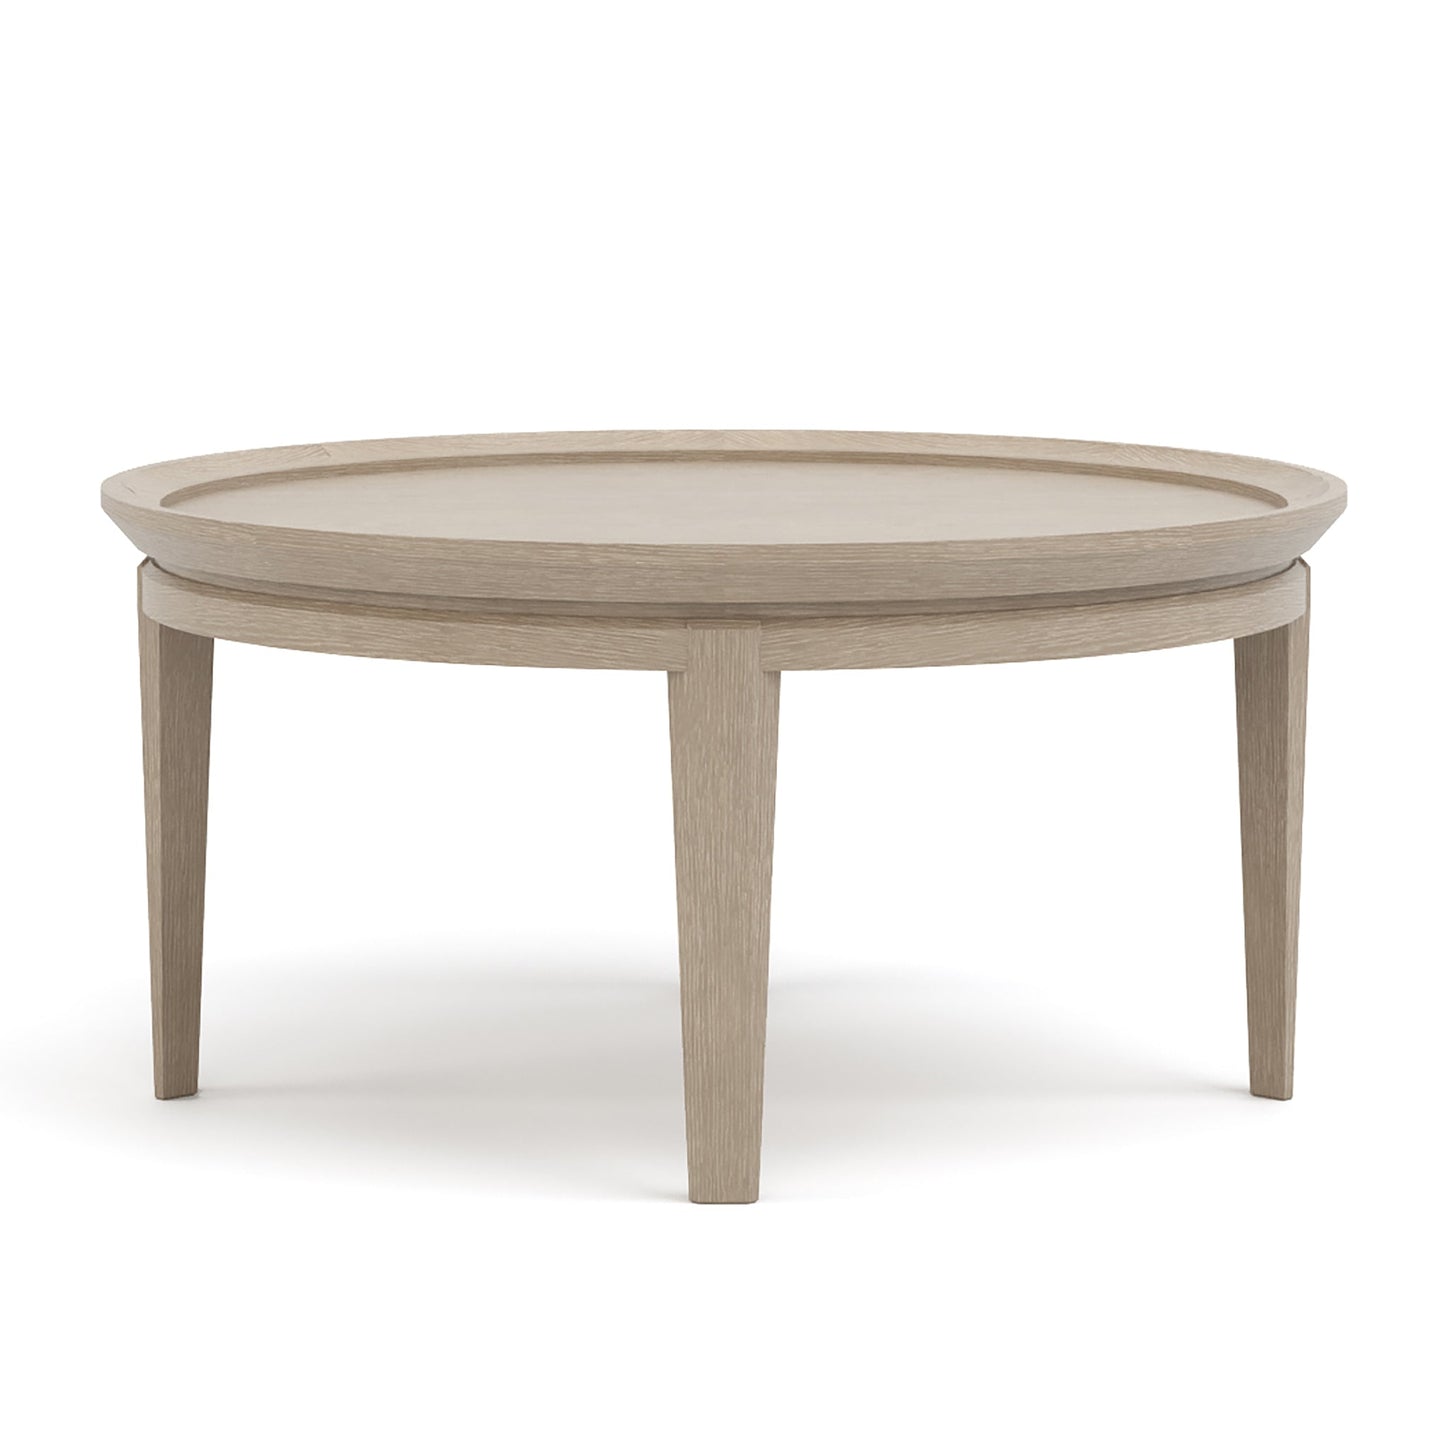 Maidstone 36-inch Round Cocktail Table in 201 Sandbank finish